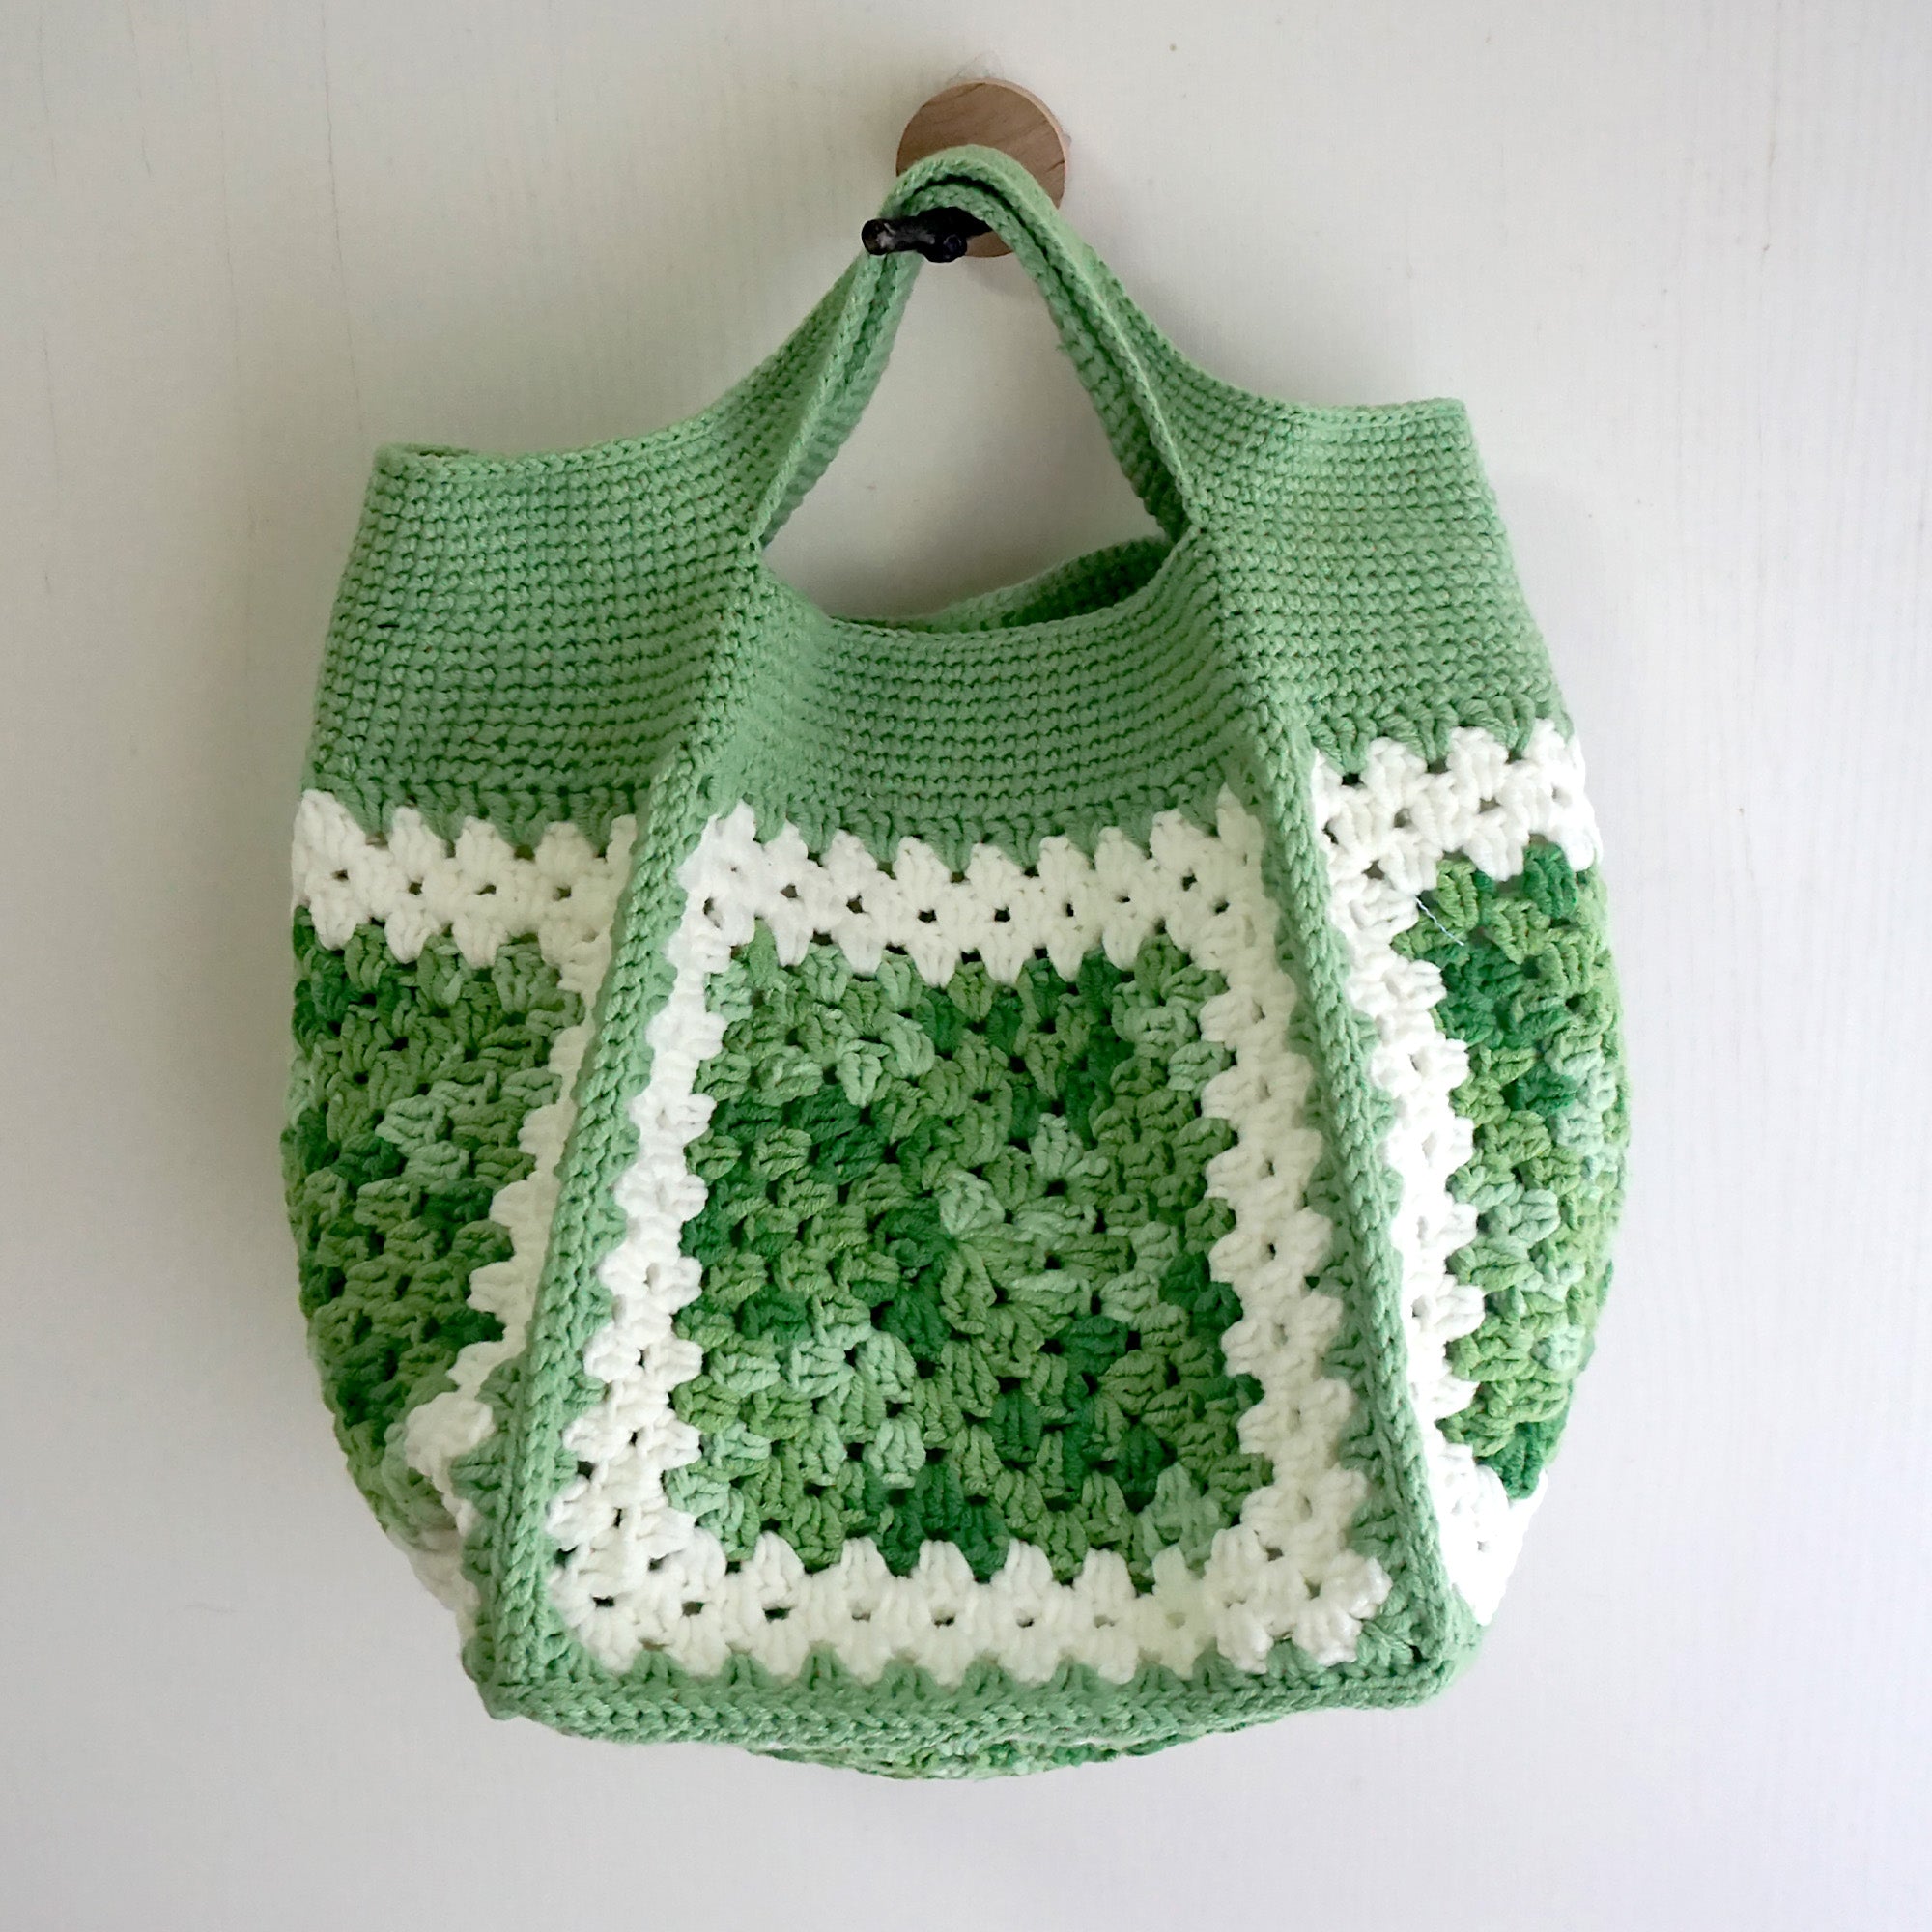 Crochet Bag, Tote style, Shopping Bag, Handmade, Knitted With Rope,  Multi-purpos | eBay